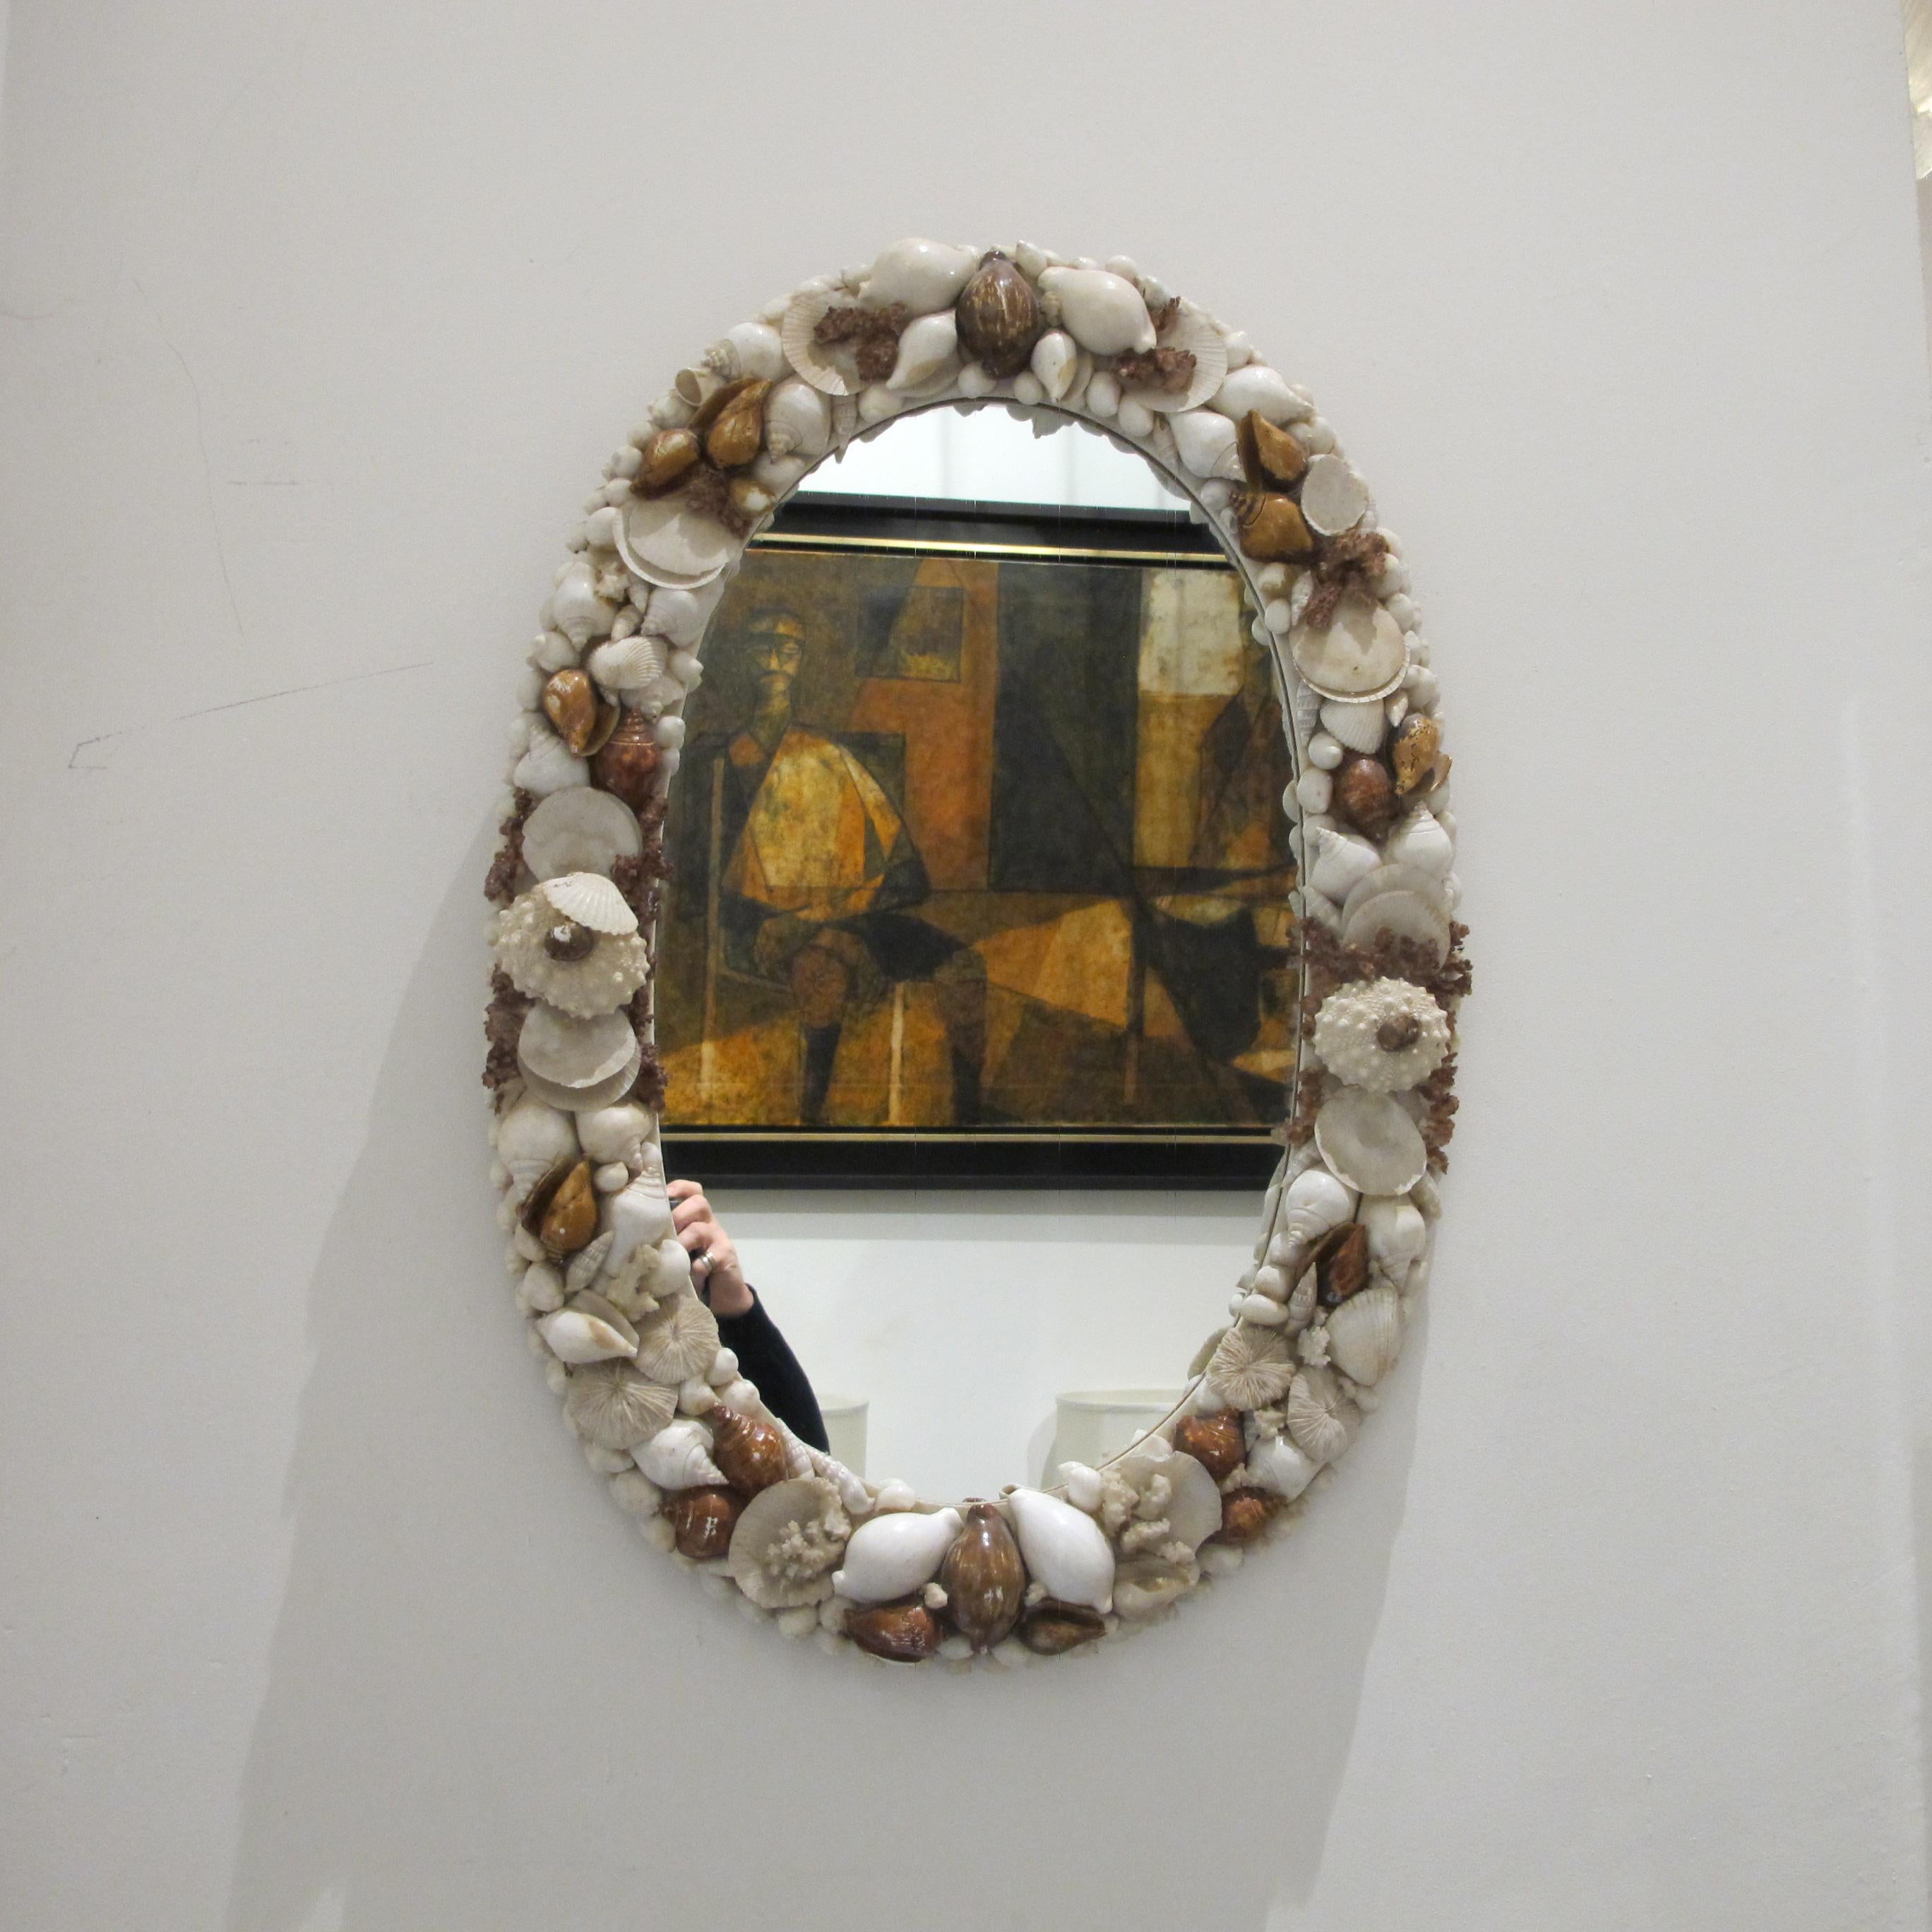 1960s Italian Oval Wall Mirror Encrusted with Sea Shells and Corals 2